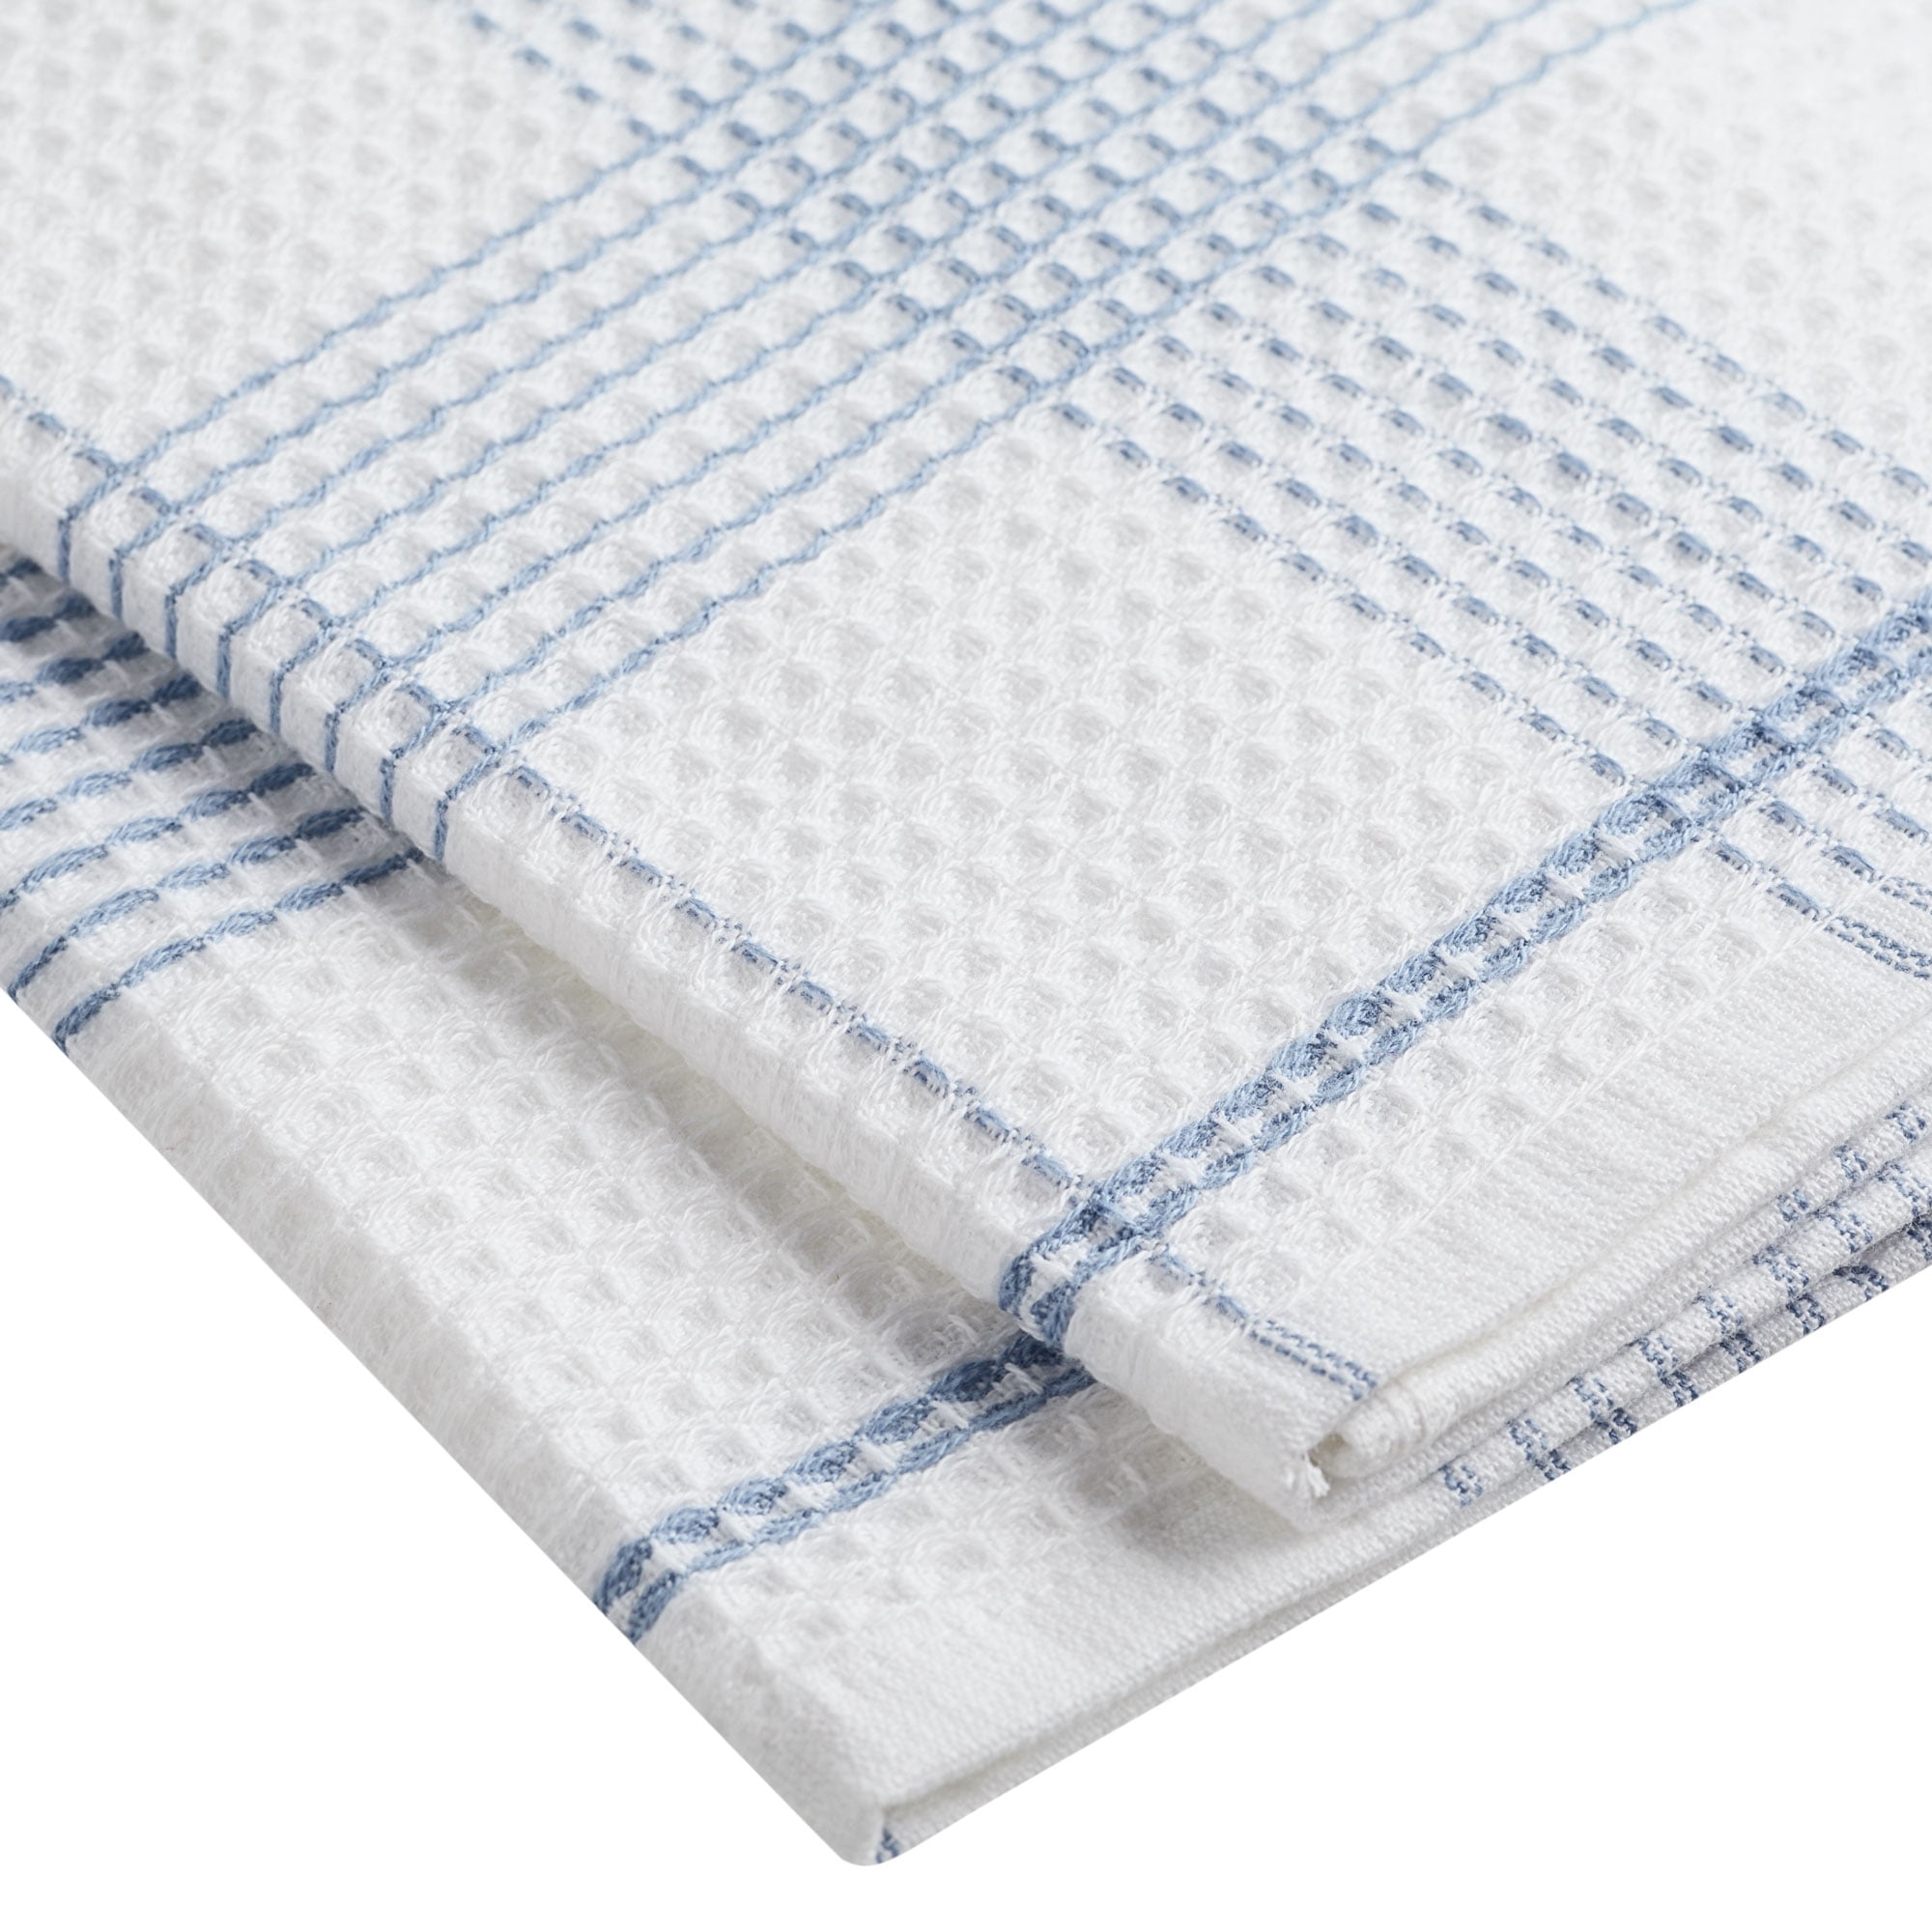 Kitinjoy 100% Cotton Waffle Weave Kitchen Towels, 4-Pack Super Soft and Absorbent Kitchen Dish Towels for Drying Dishes, Kitchen Hand Towels, 13 in